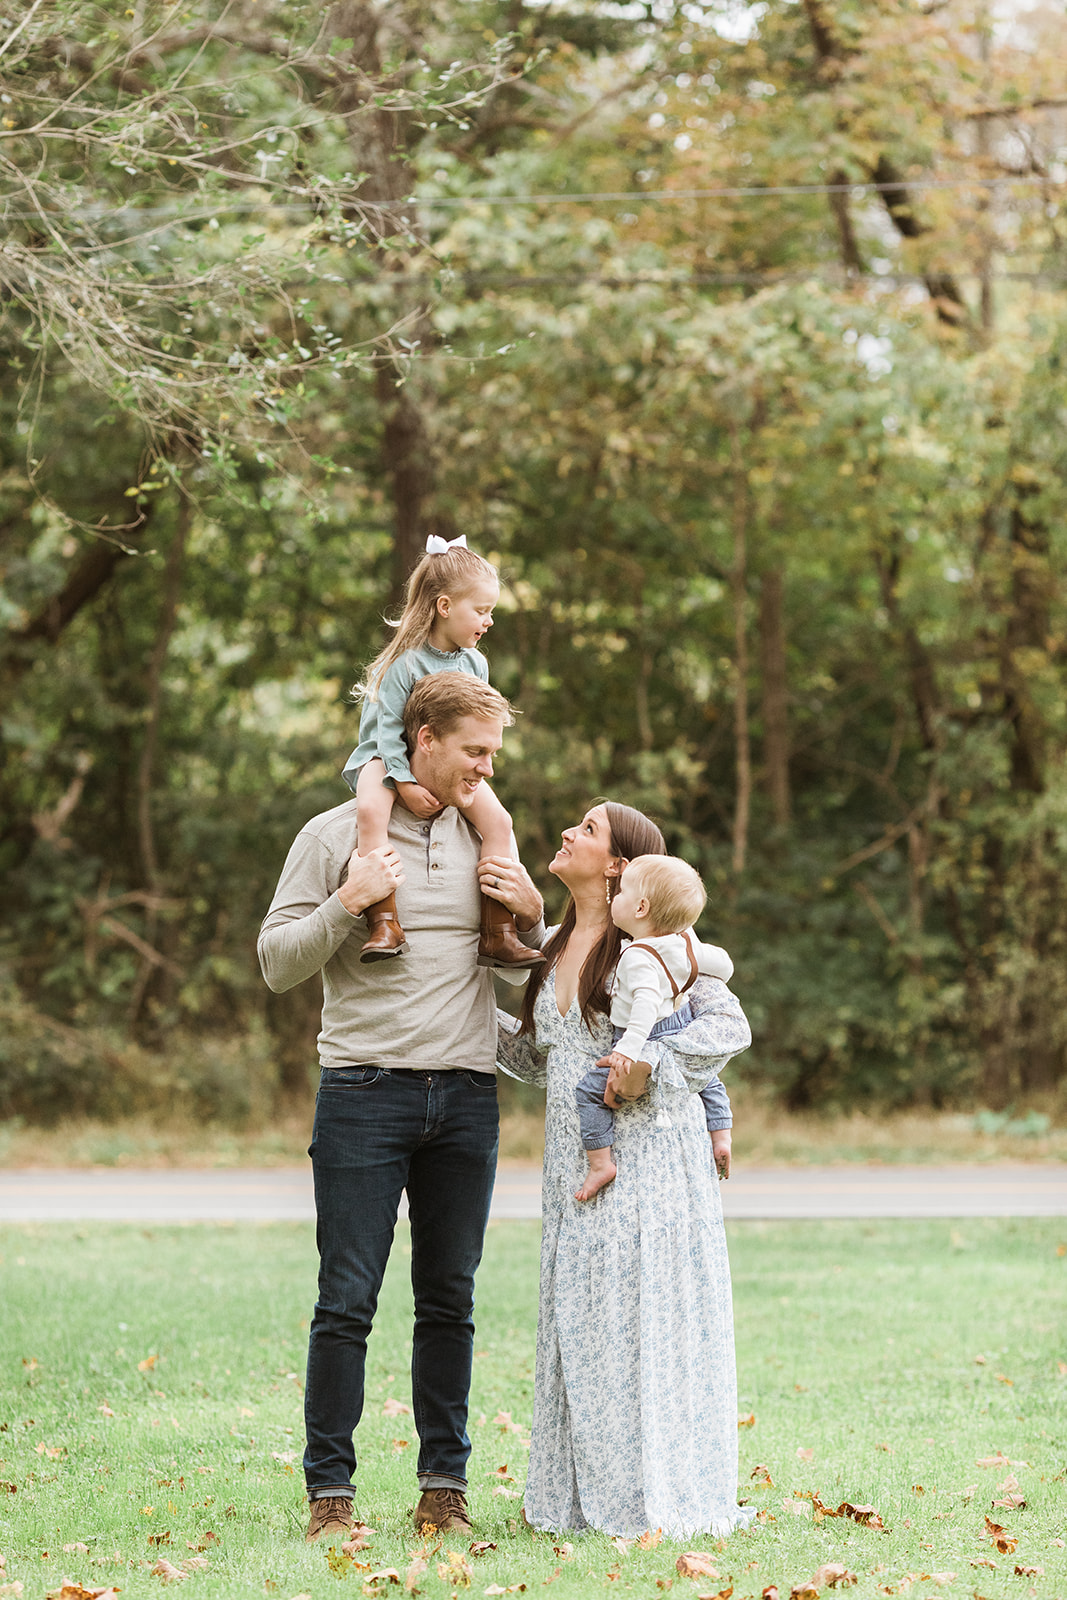 1 year old photo shoot in nashville tennessee. outdoor family photo